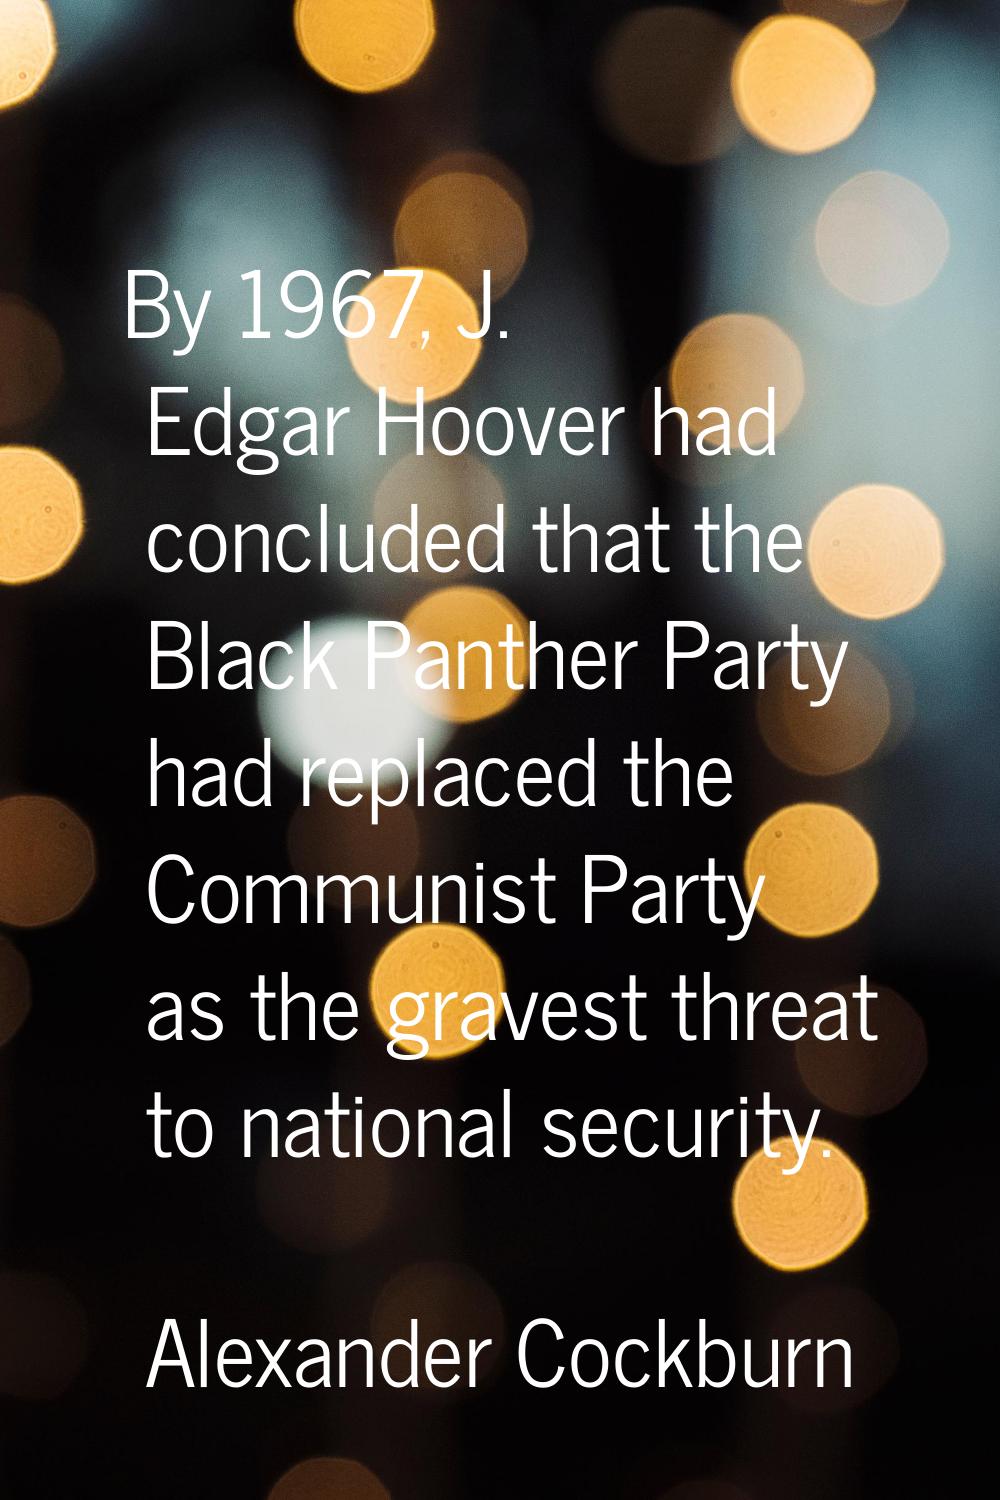 By 1967, J. Edgar Hoover had concluded that the Black Panther Party had replaced the Communist Part